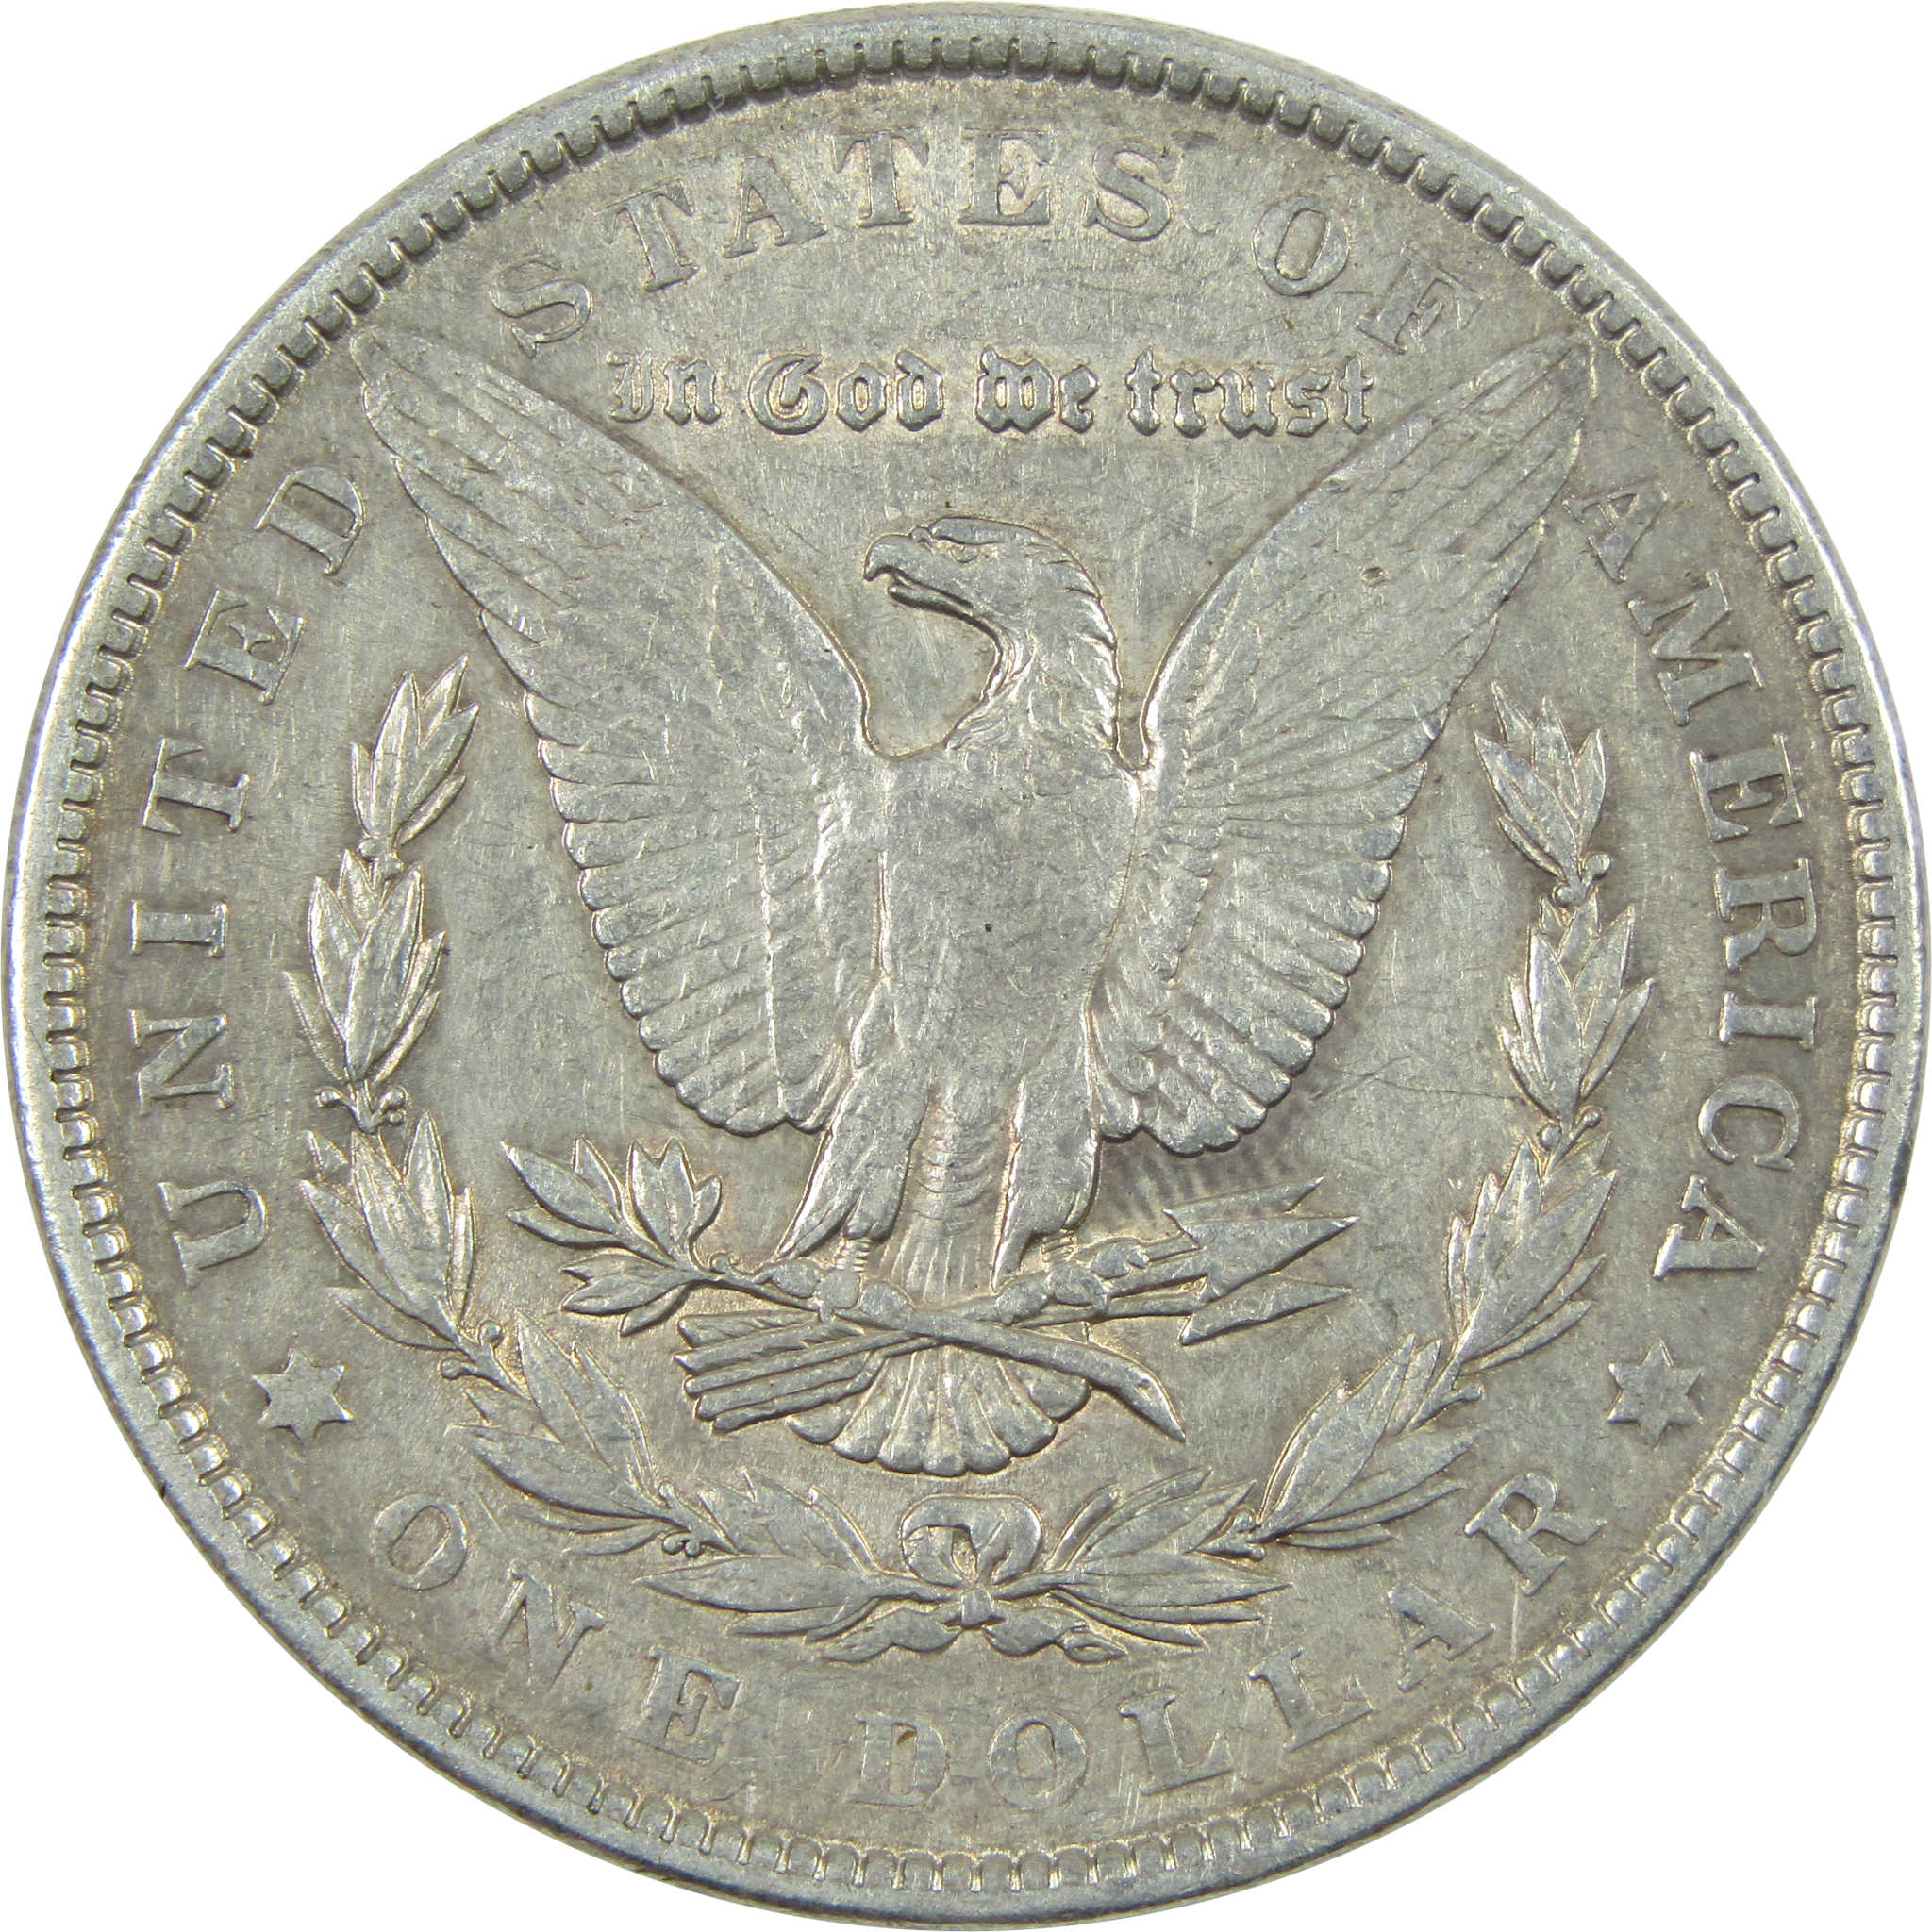 1901 Morgan Dollar XF EF Extremely Fine Details Silver $1 SKU:I14043 - Morgan coin - Morgan silver dollar - Morgan silver dollar for sale - Profile Coins &amp; Collectibles